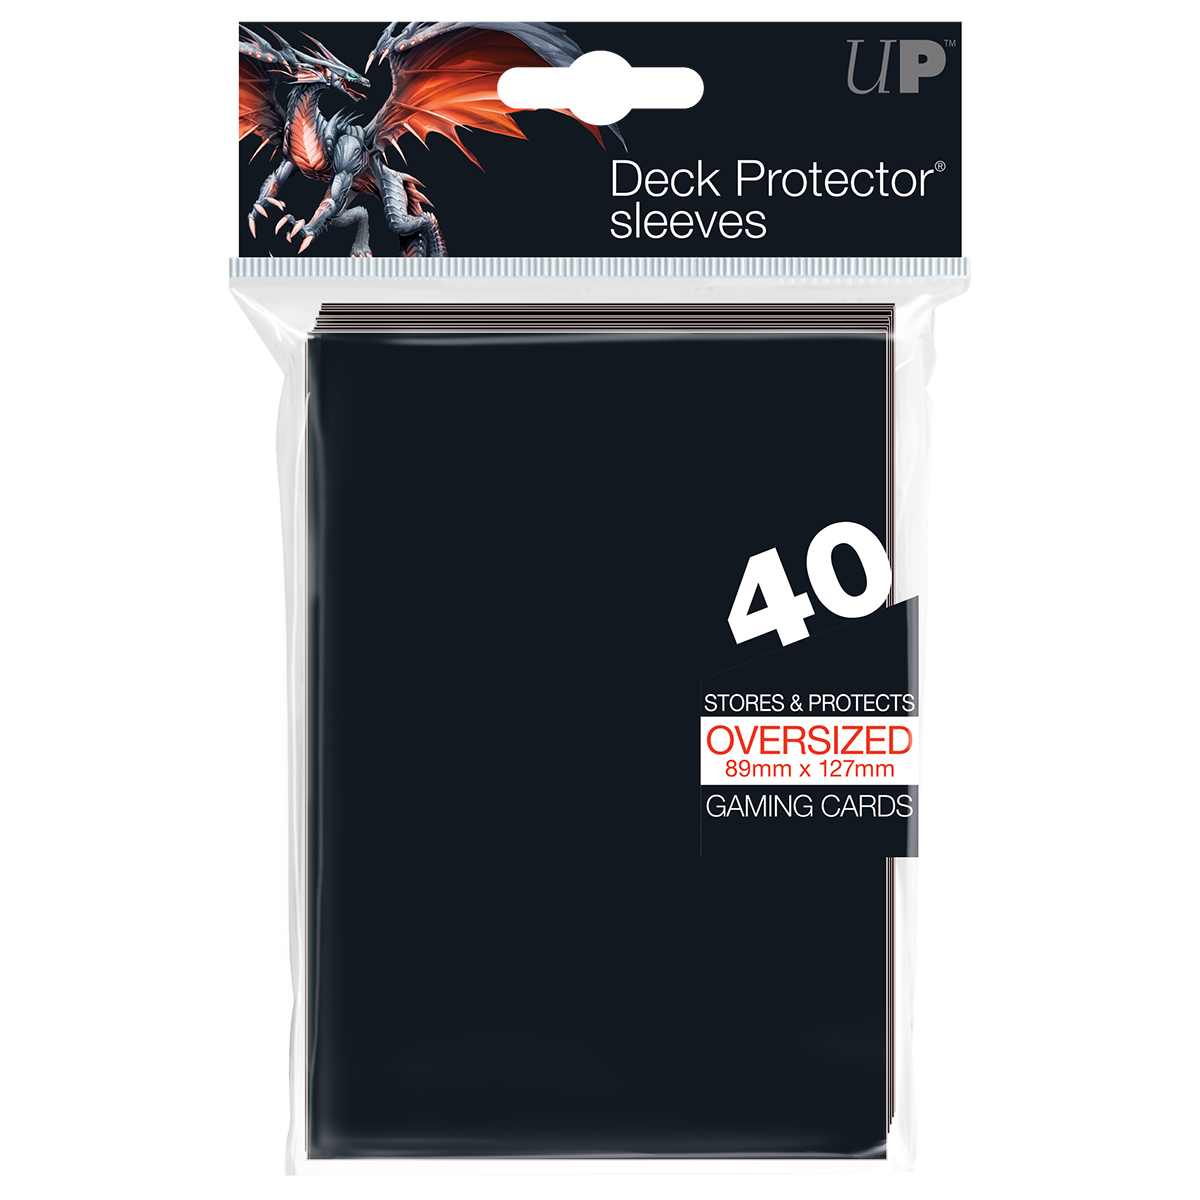 Top Loading Oversized Deck Protector Sleeves (40ct)